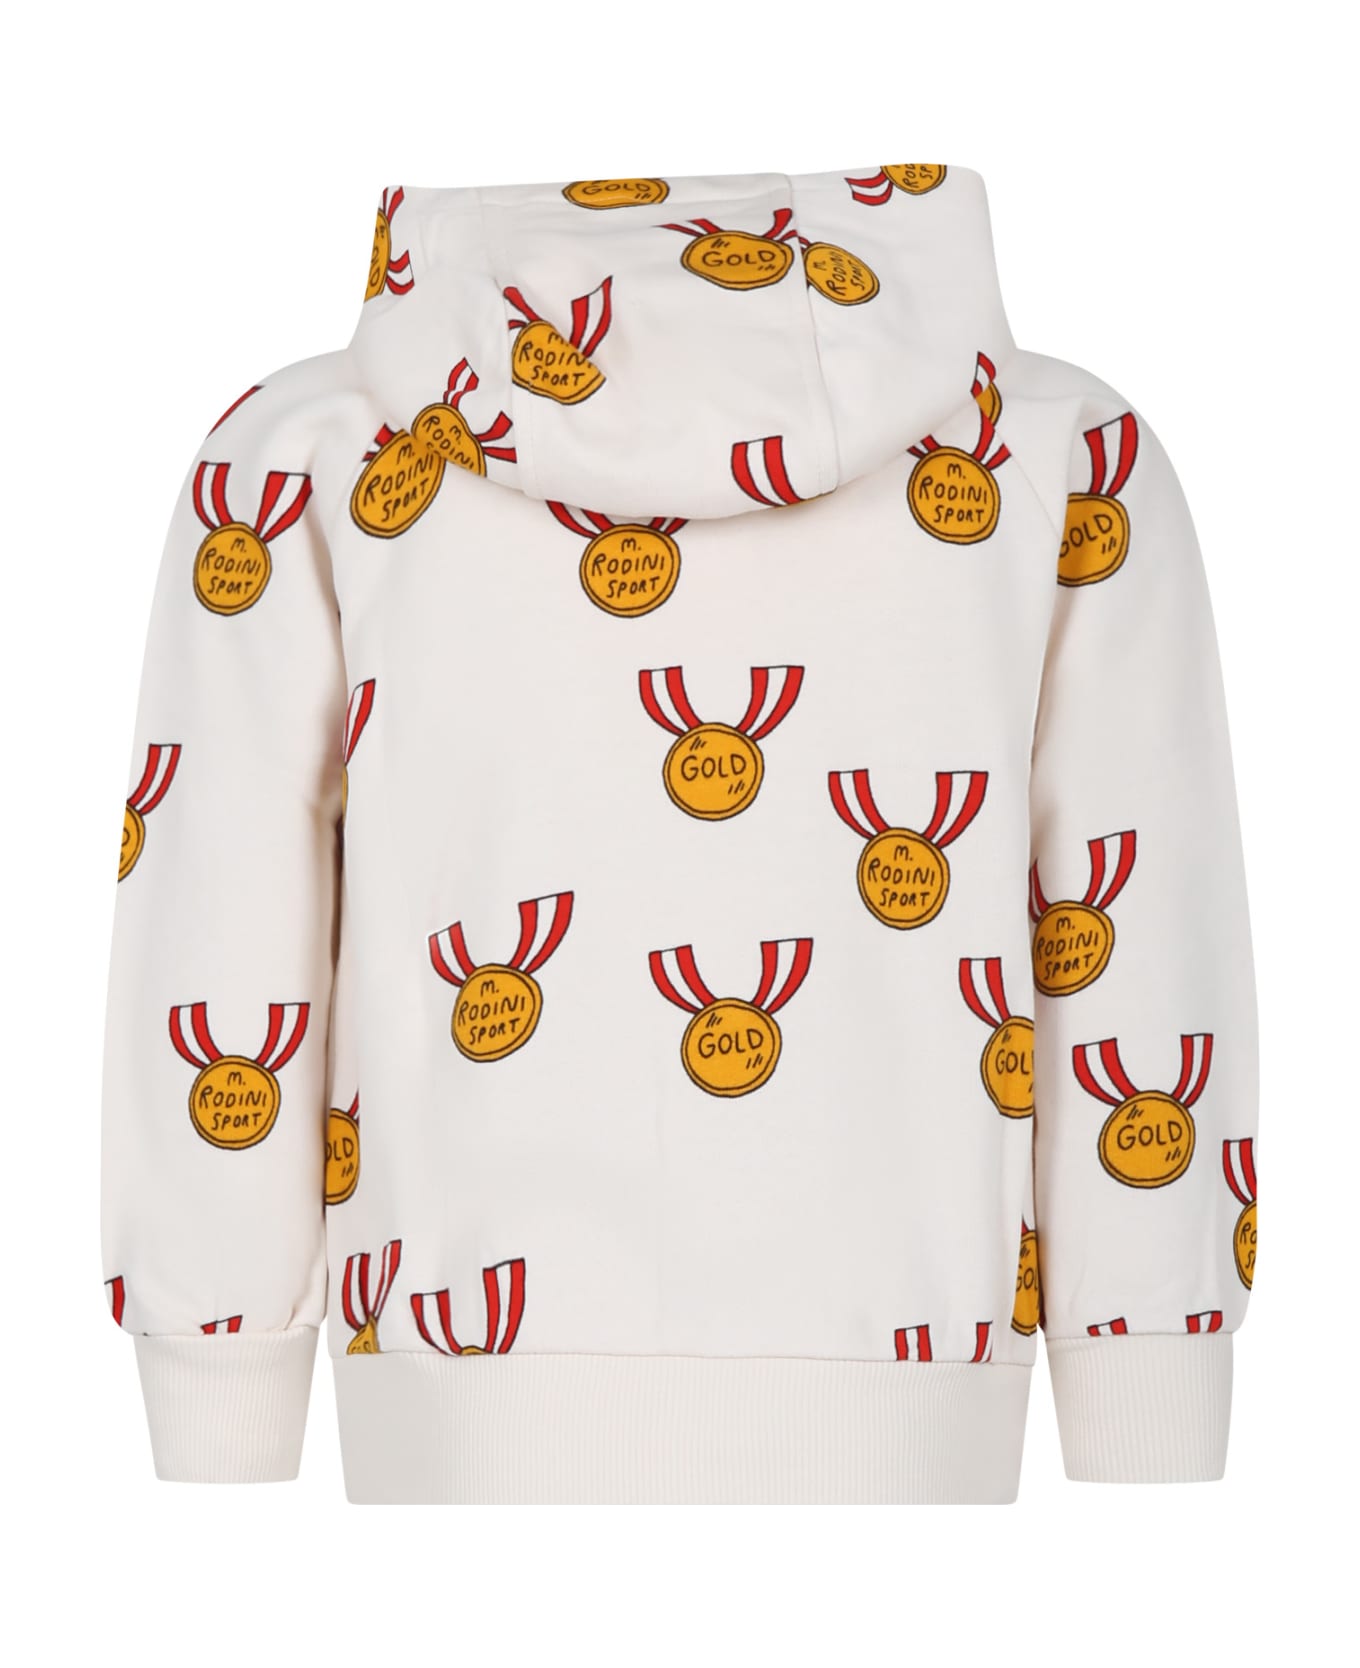 Mini Rodini Ivory Sweatshirt For Kids With Medals - Ivory